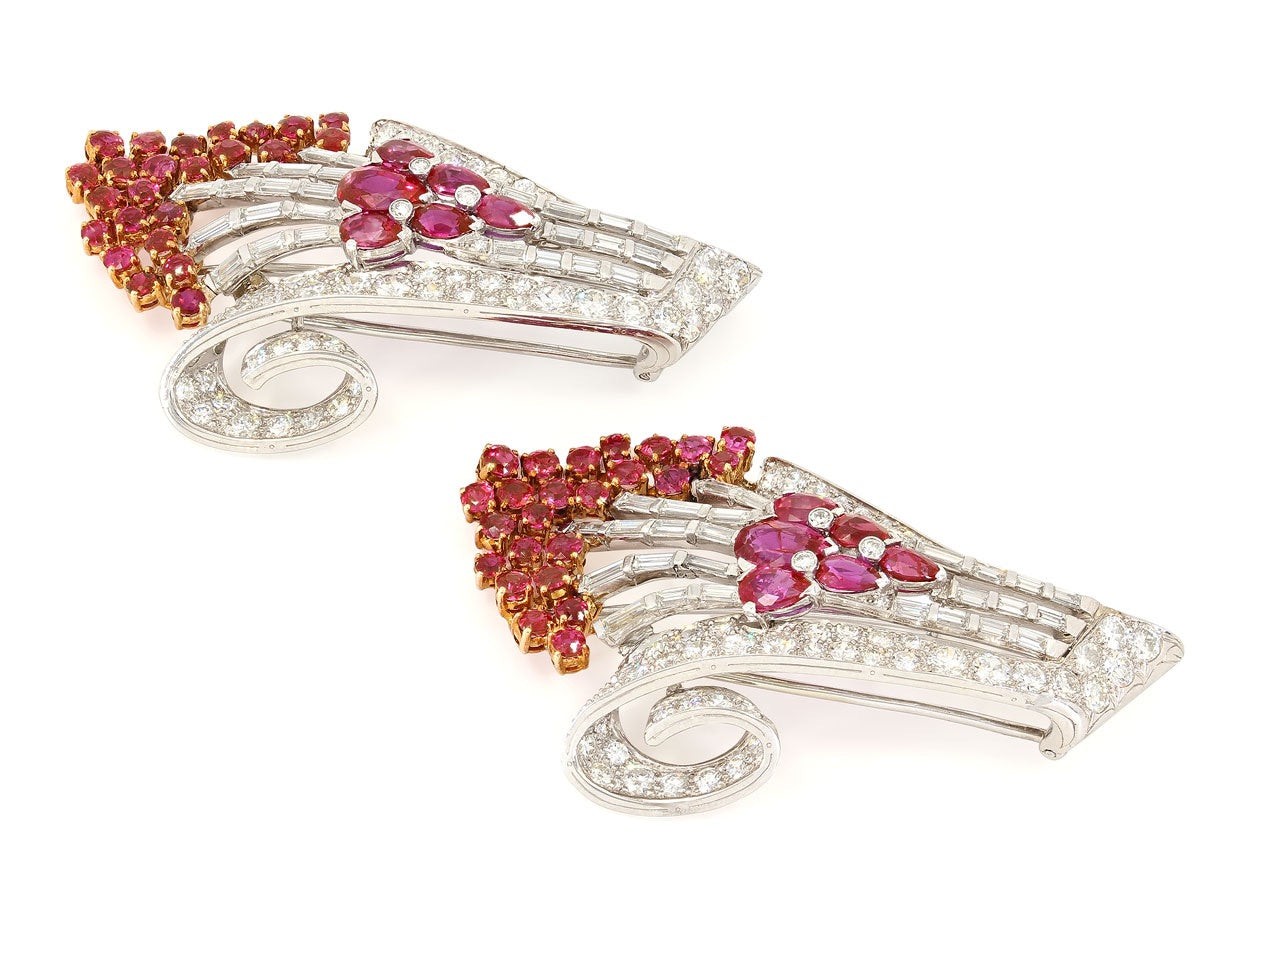 Pair of Ruby and Diamond Spray Brooches in 18K White Gold